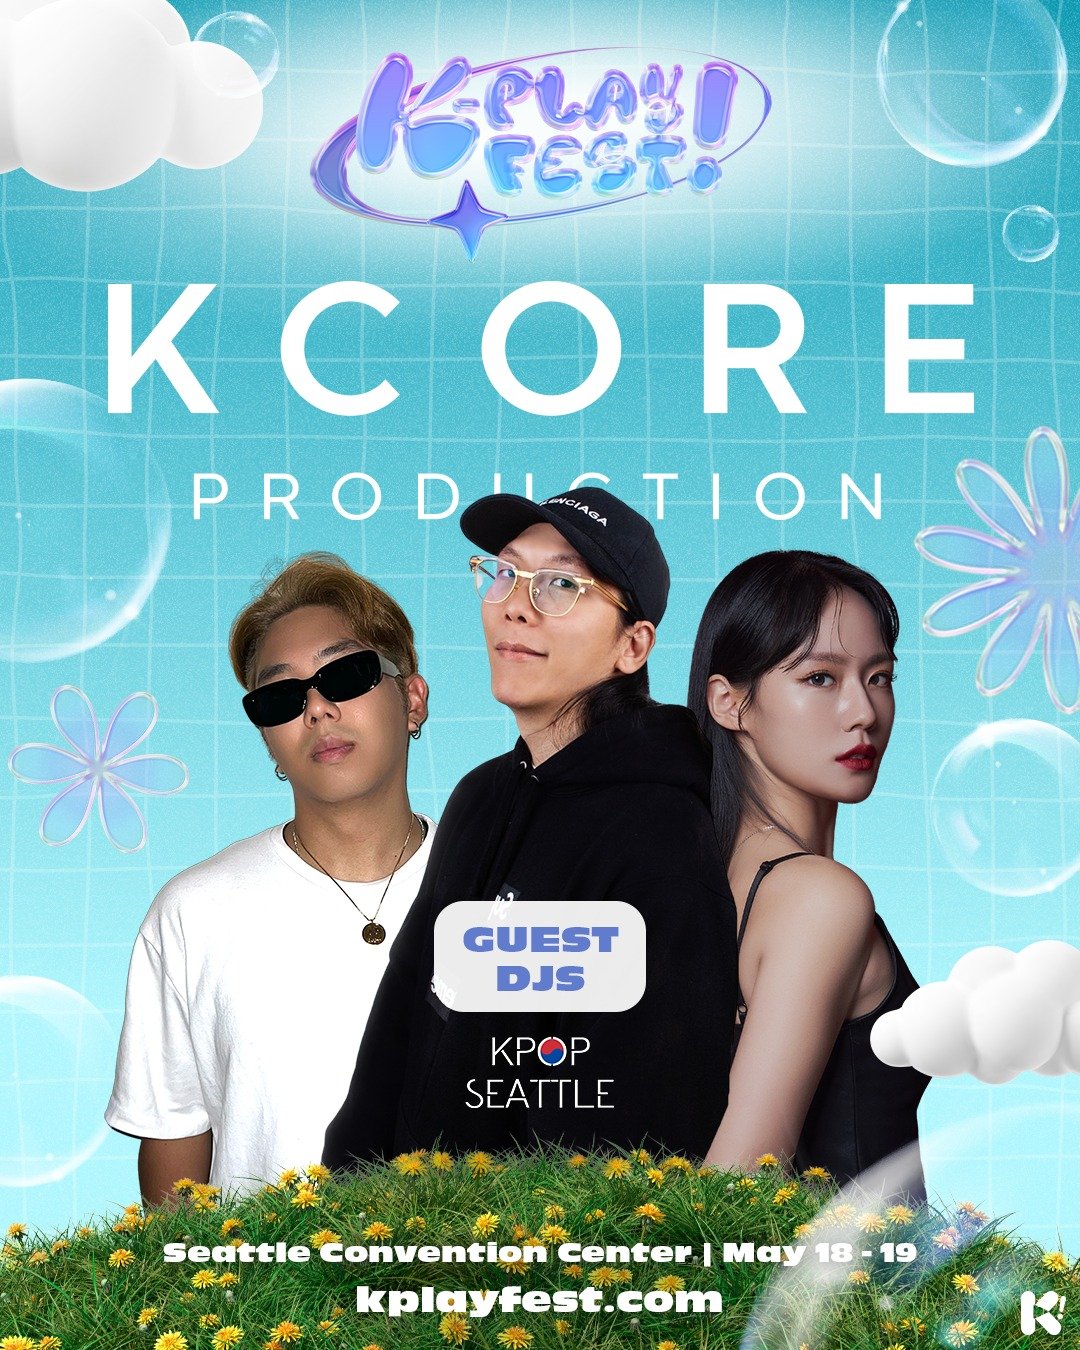 YEAH YOU AIN&rsquo;T SEEN NOTHING YET~👀 That&rsquo;s right! Join them at their DJ Sets🎶 all weekend long for a fun time with @kcoreproduction !🪩 These K-POP DJs are going to bring the HEAT🔥so make sure to stop by! 🤩

❤️Saturday May 18th:
K-PLAY!